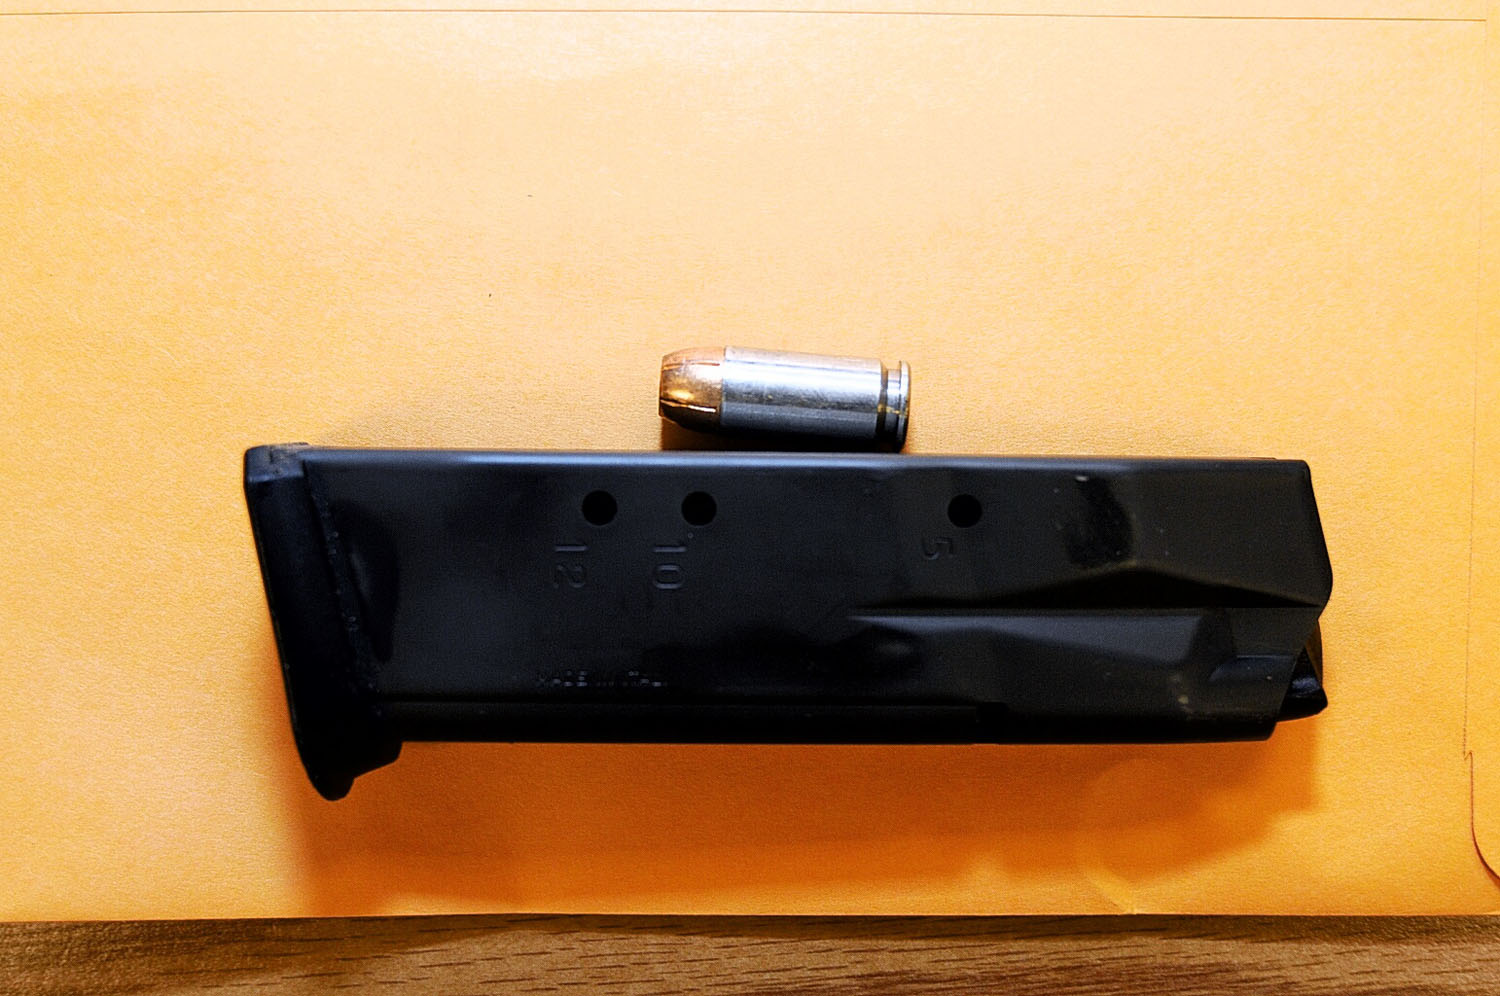 A bullet found in Officer Wilson's weapon after the shooting of Michael Brown